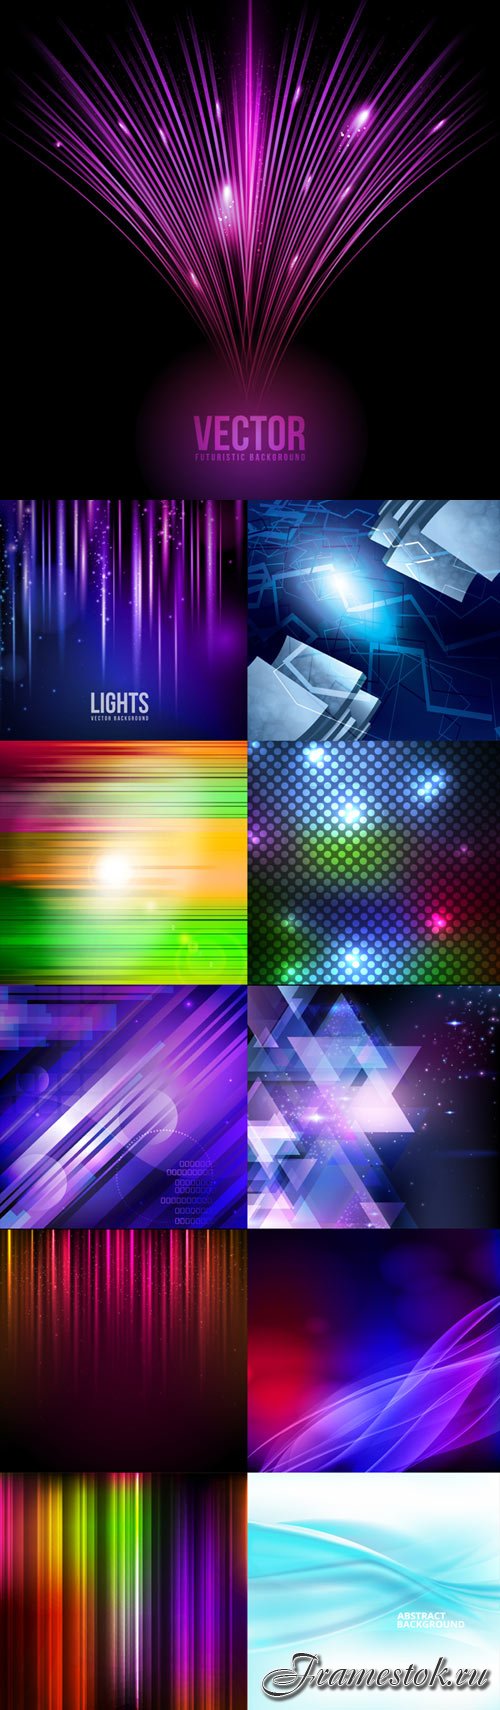 Stylish abstract vector backgrounds set 15